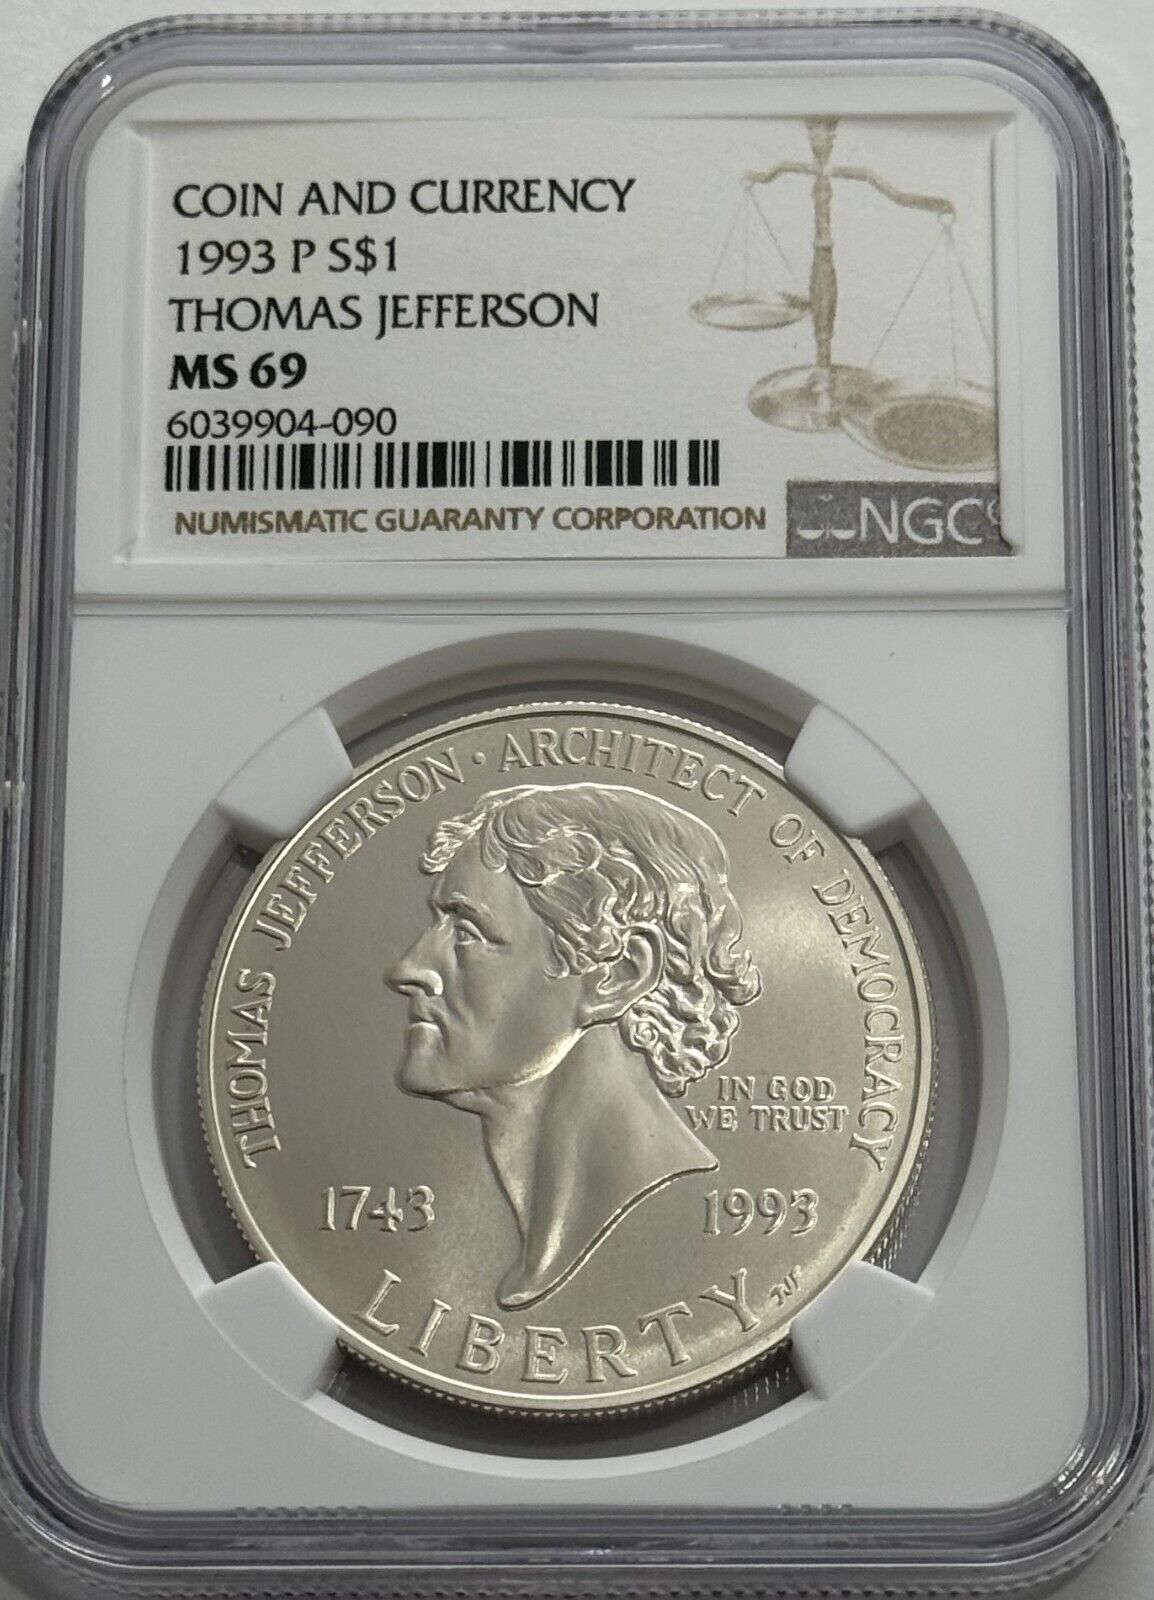 1993 P $1 NGC MS69 THOMAS JEFFERSON 90% SILVER COMMEMORATIVE COIN & CURRENCY SET